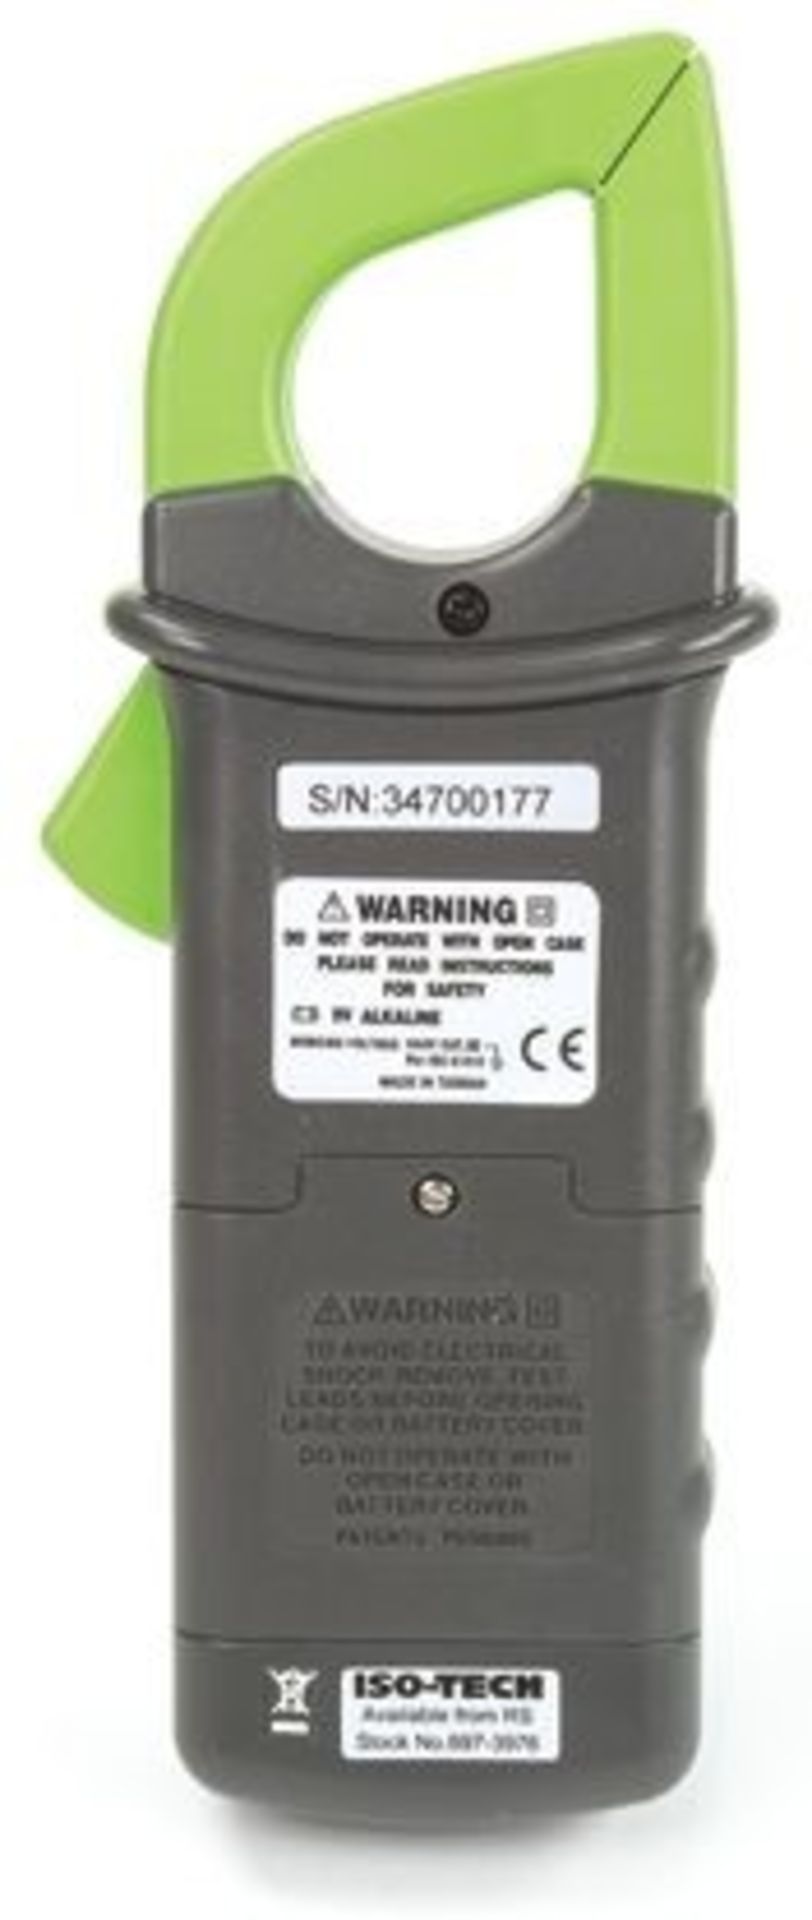 ISO-TECH ICM33II Digital Clamp Meter, Max Current 600A ac CAT III 300 V - Image 2 of 2